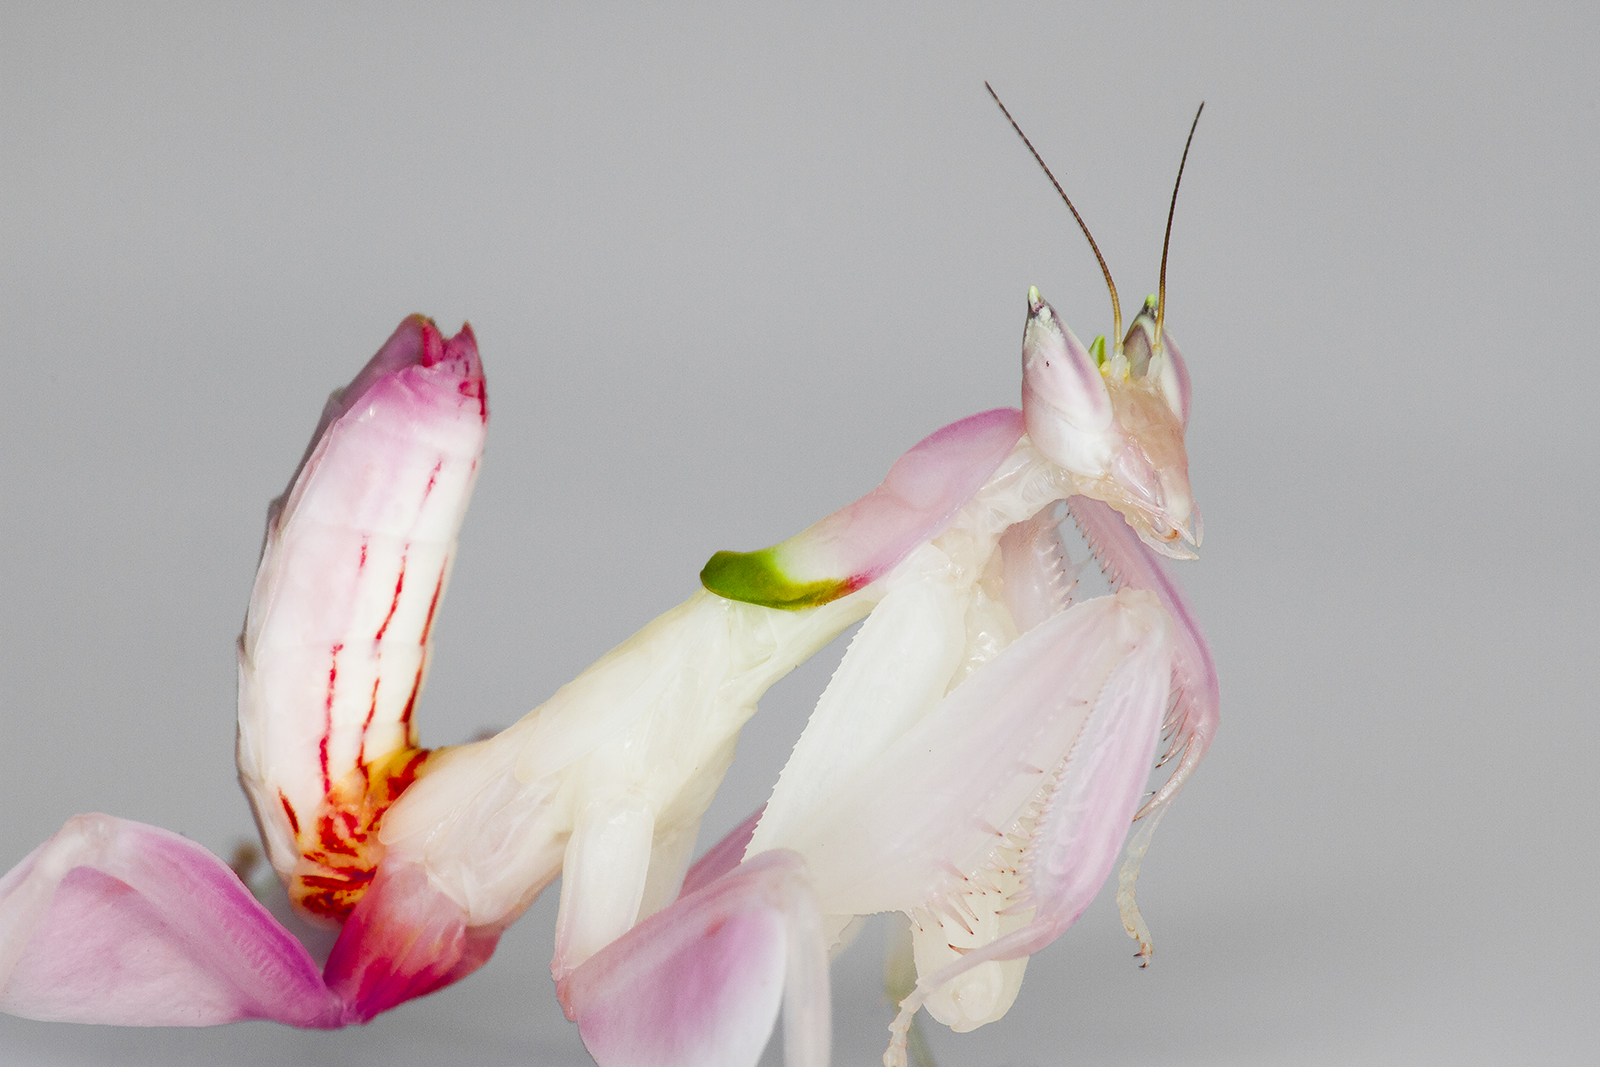 Unraveling The Orchid Mantis Mystery